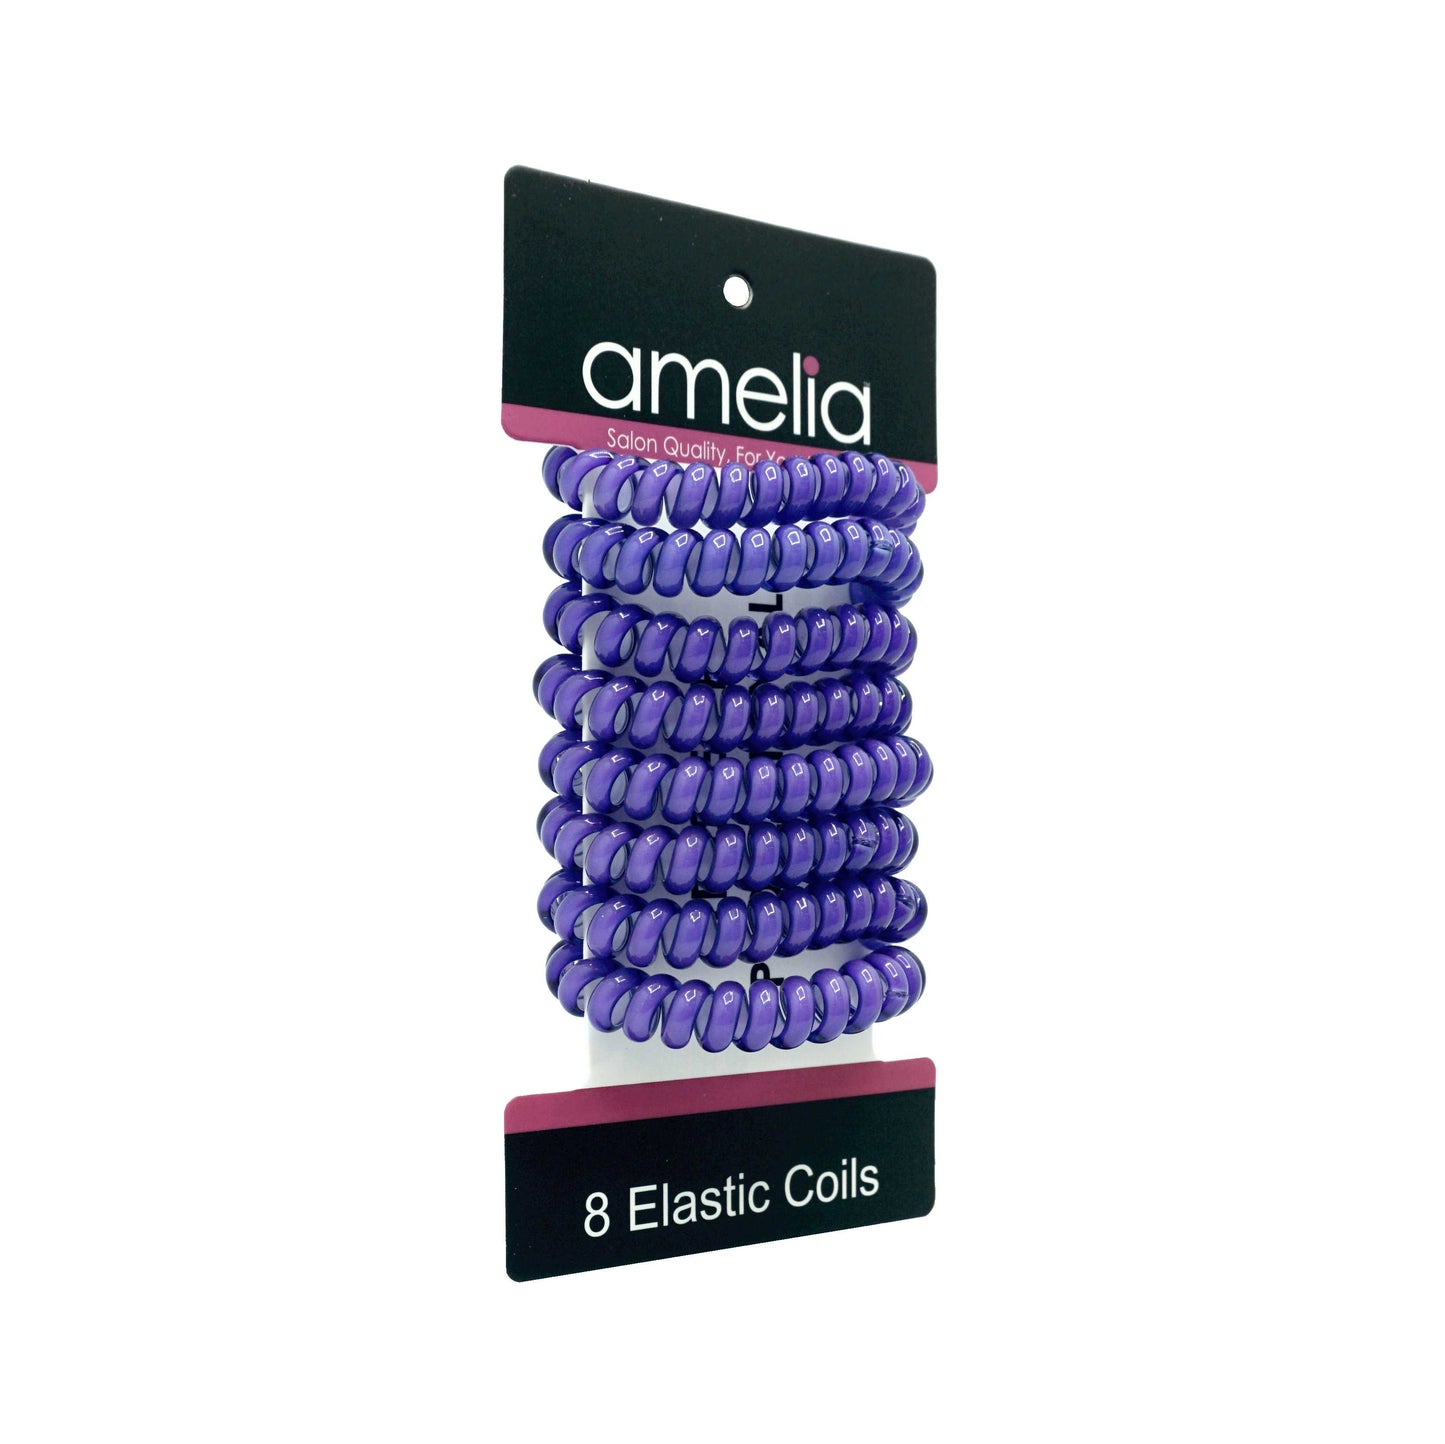 Amelia Beauty Products 8 Medium Elastic Hair Coils, 2.0in Diameter Thick Spiral Hair Ties, Gentle on Hair, Strong Hold and Minimizes Dents and Creases, Violet